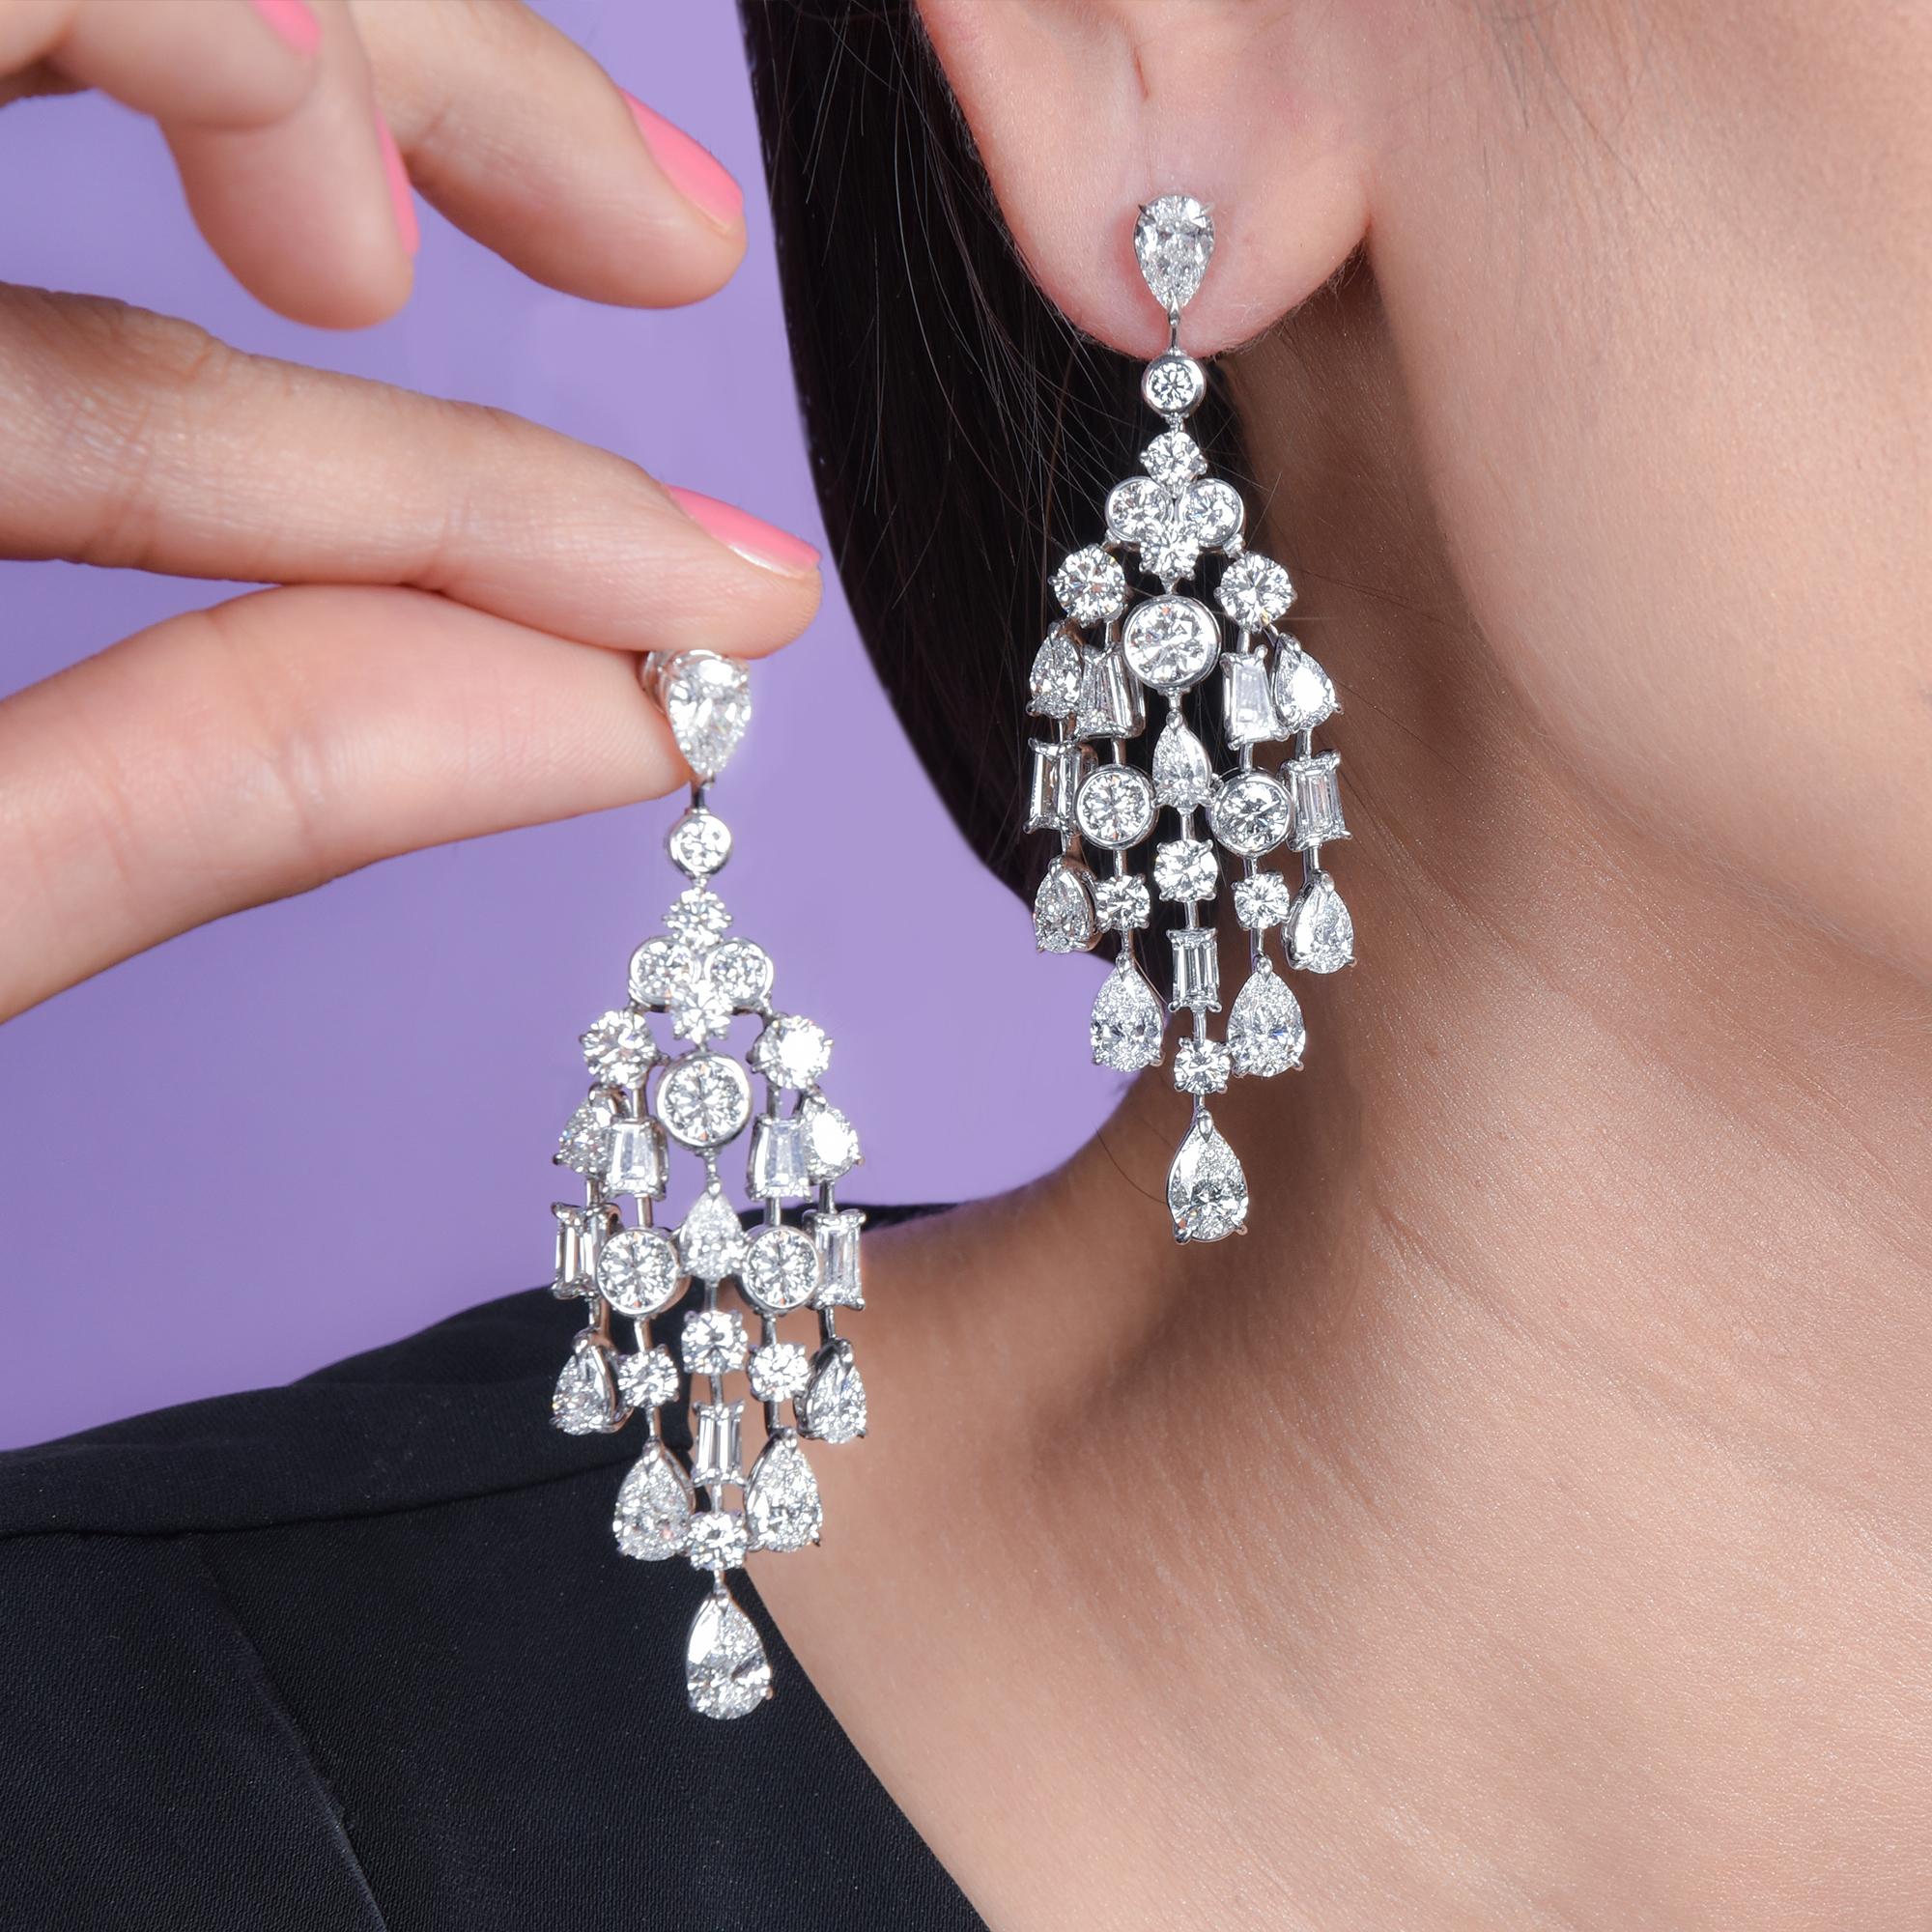 These high jewelry earrings from our Raindrop Collection are studded with 28 brilliant round cut diamonds, 10 tapered baguettes, 18 pear shape diamonds, in bezel and claw setting and crafted in platinum. It secures comfortably with guardian post